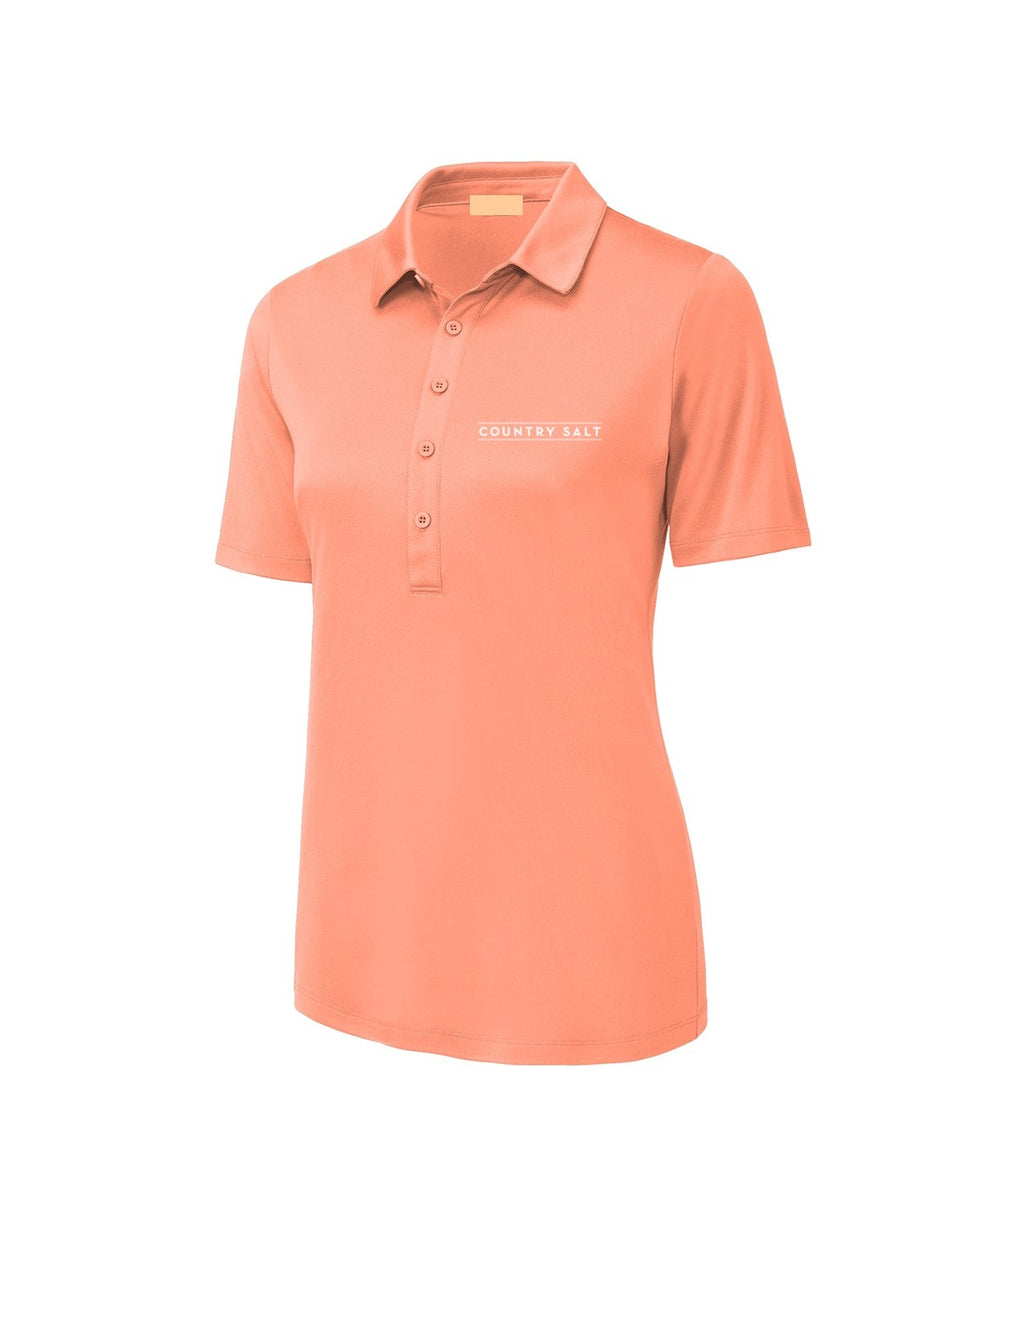 The "B-one-3" Golf Women's Polo